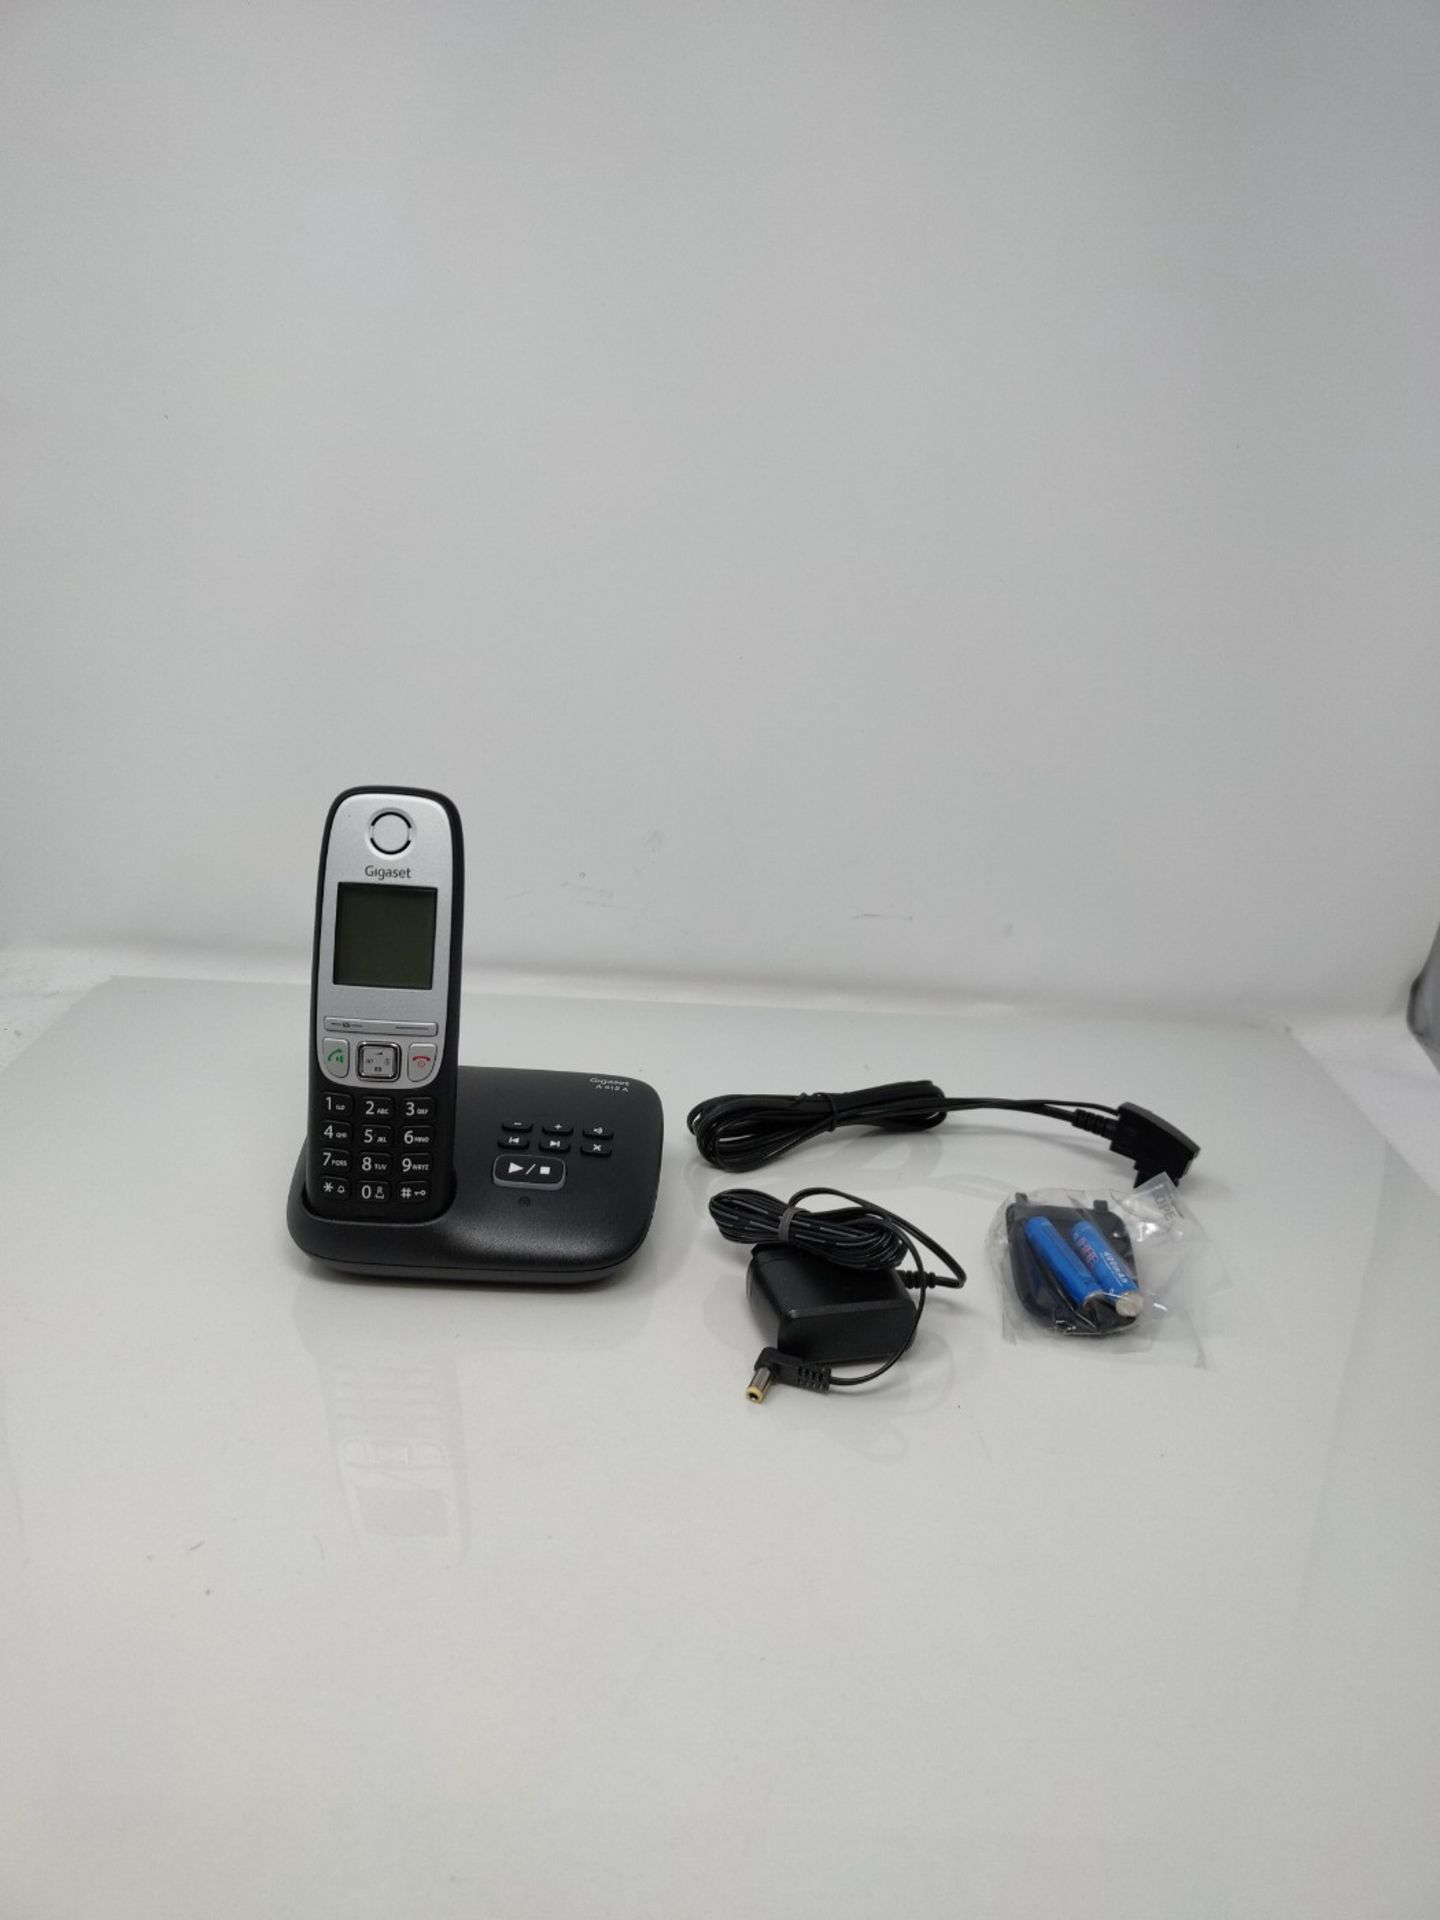 Gigaset A415A, cordless telephone DECT with answering machine, hands-free function, sp - Bild 3 aus 3